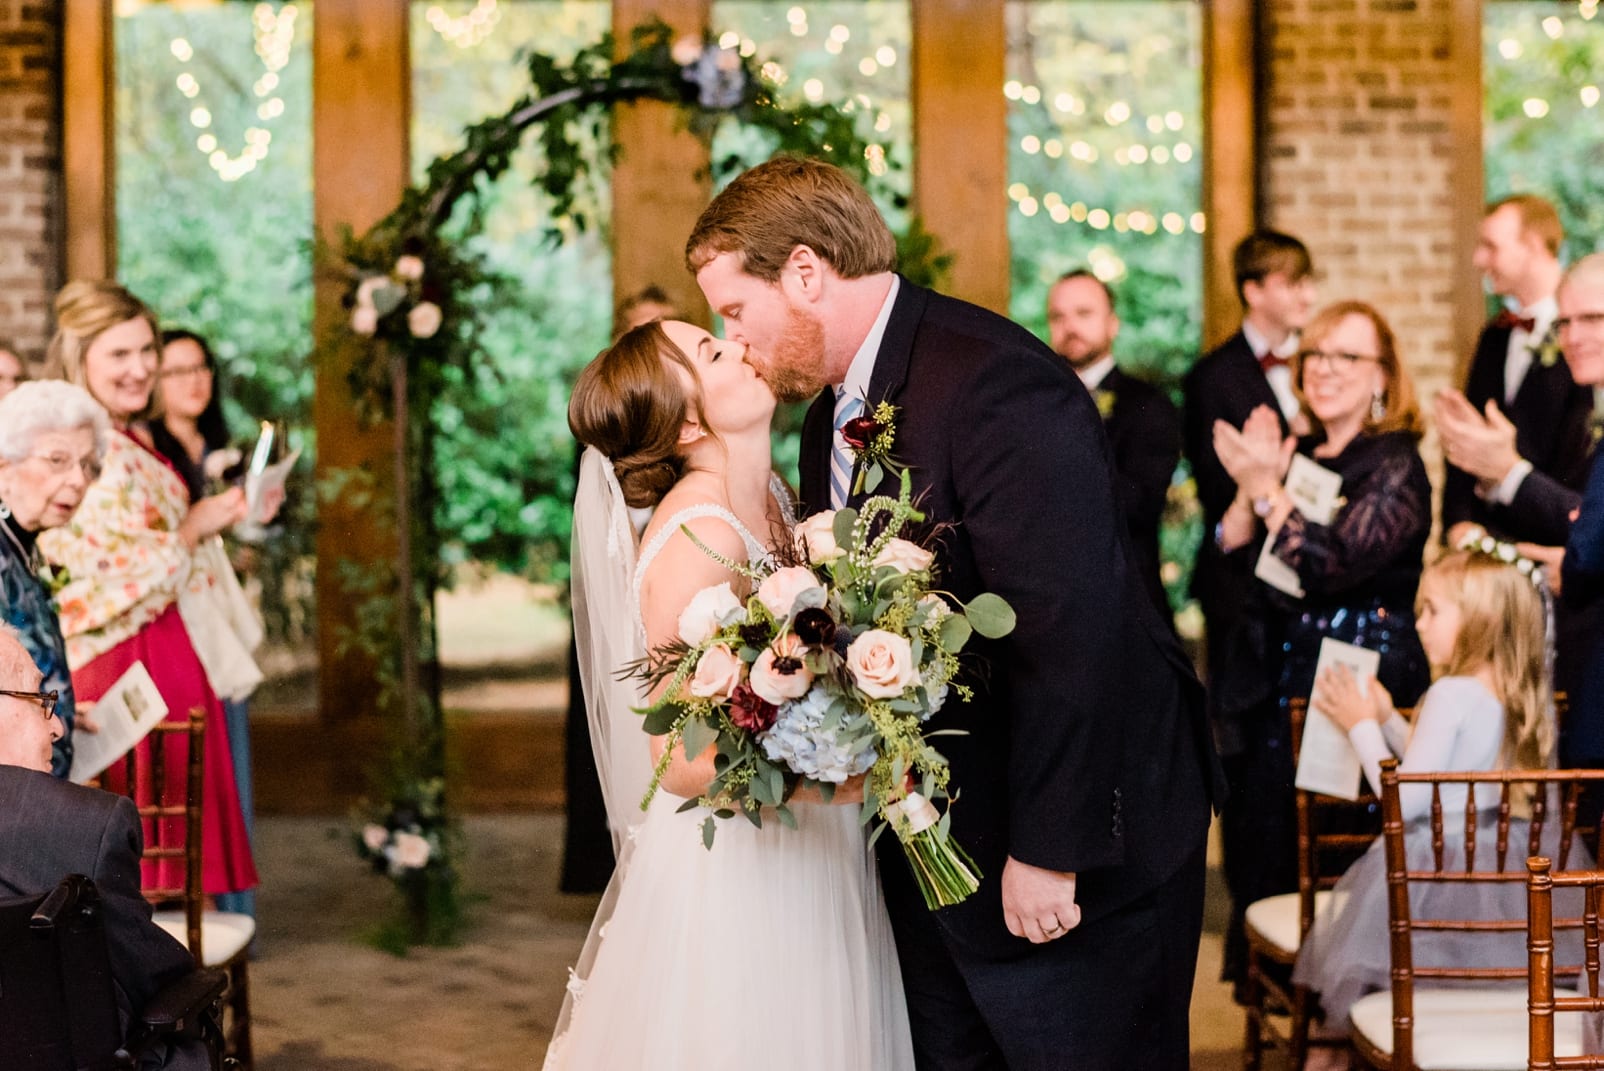 Wake Forest indoor wedding ceremony bride and groom kissing after getting married photo